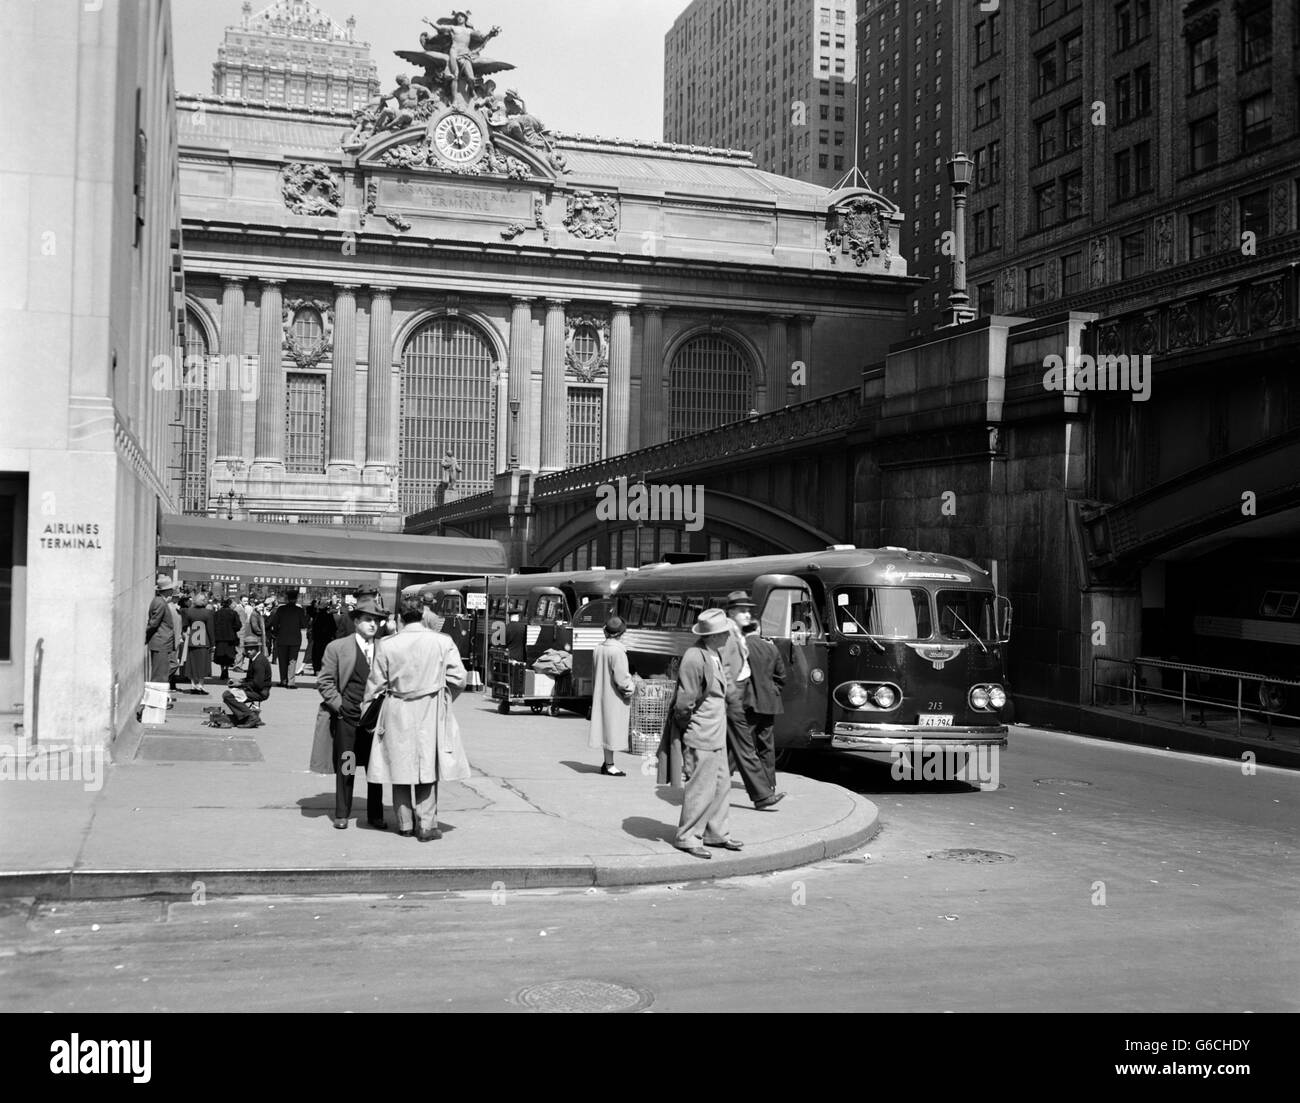 1940ER JAHRE BUSSE AIRLINES TERMINAL BUILDING AM PARK AVE PERSHING SQUARE GRAND CENTRAL STATION MIDTOWN MANHATTAN NEW YORK CITY USA Stockfoto